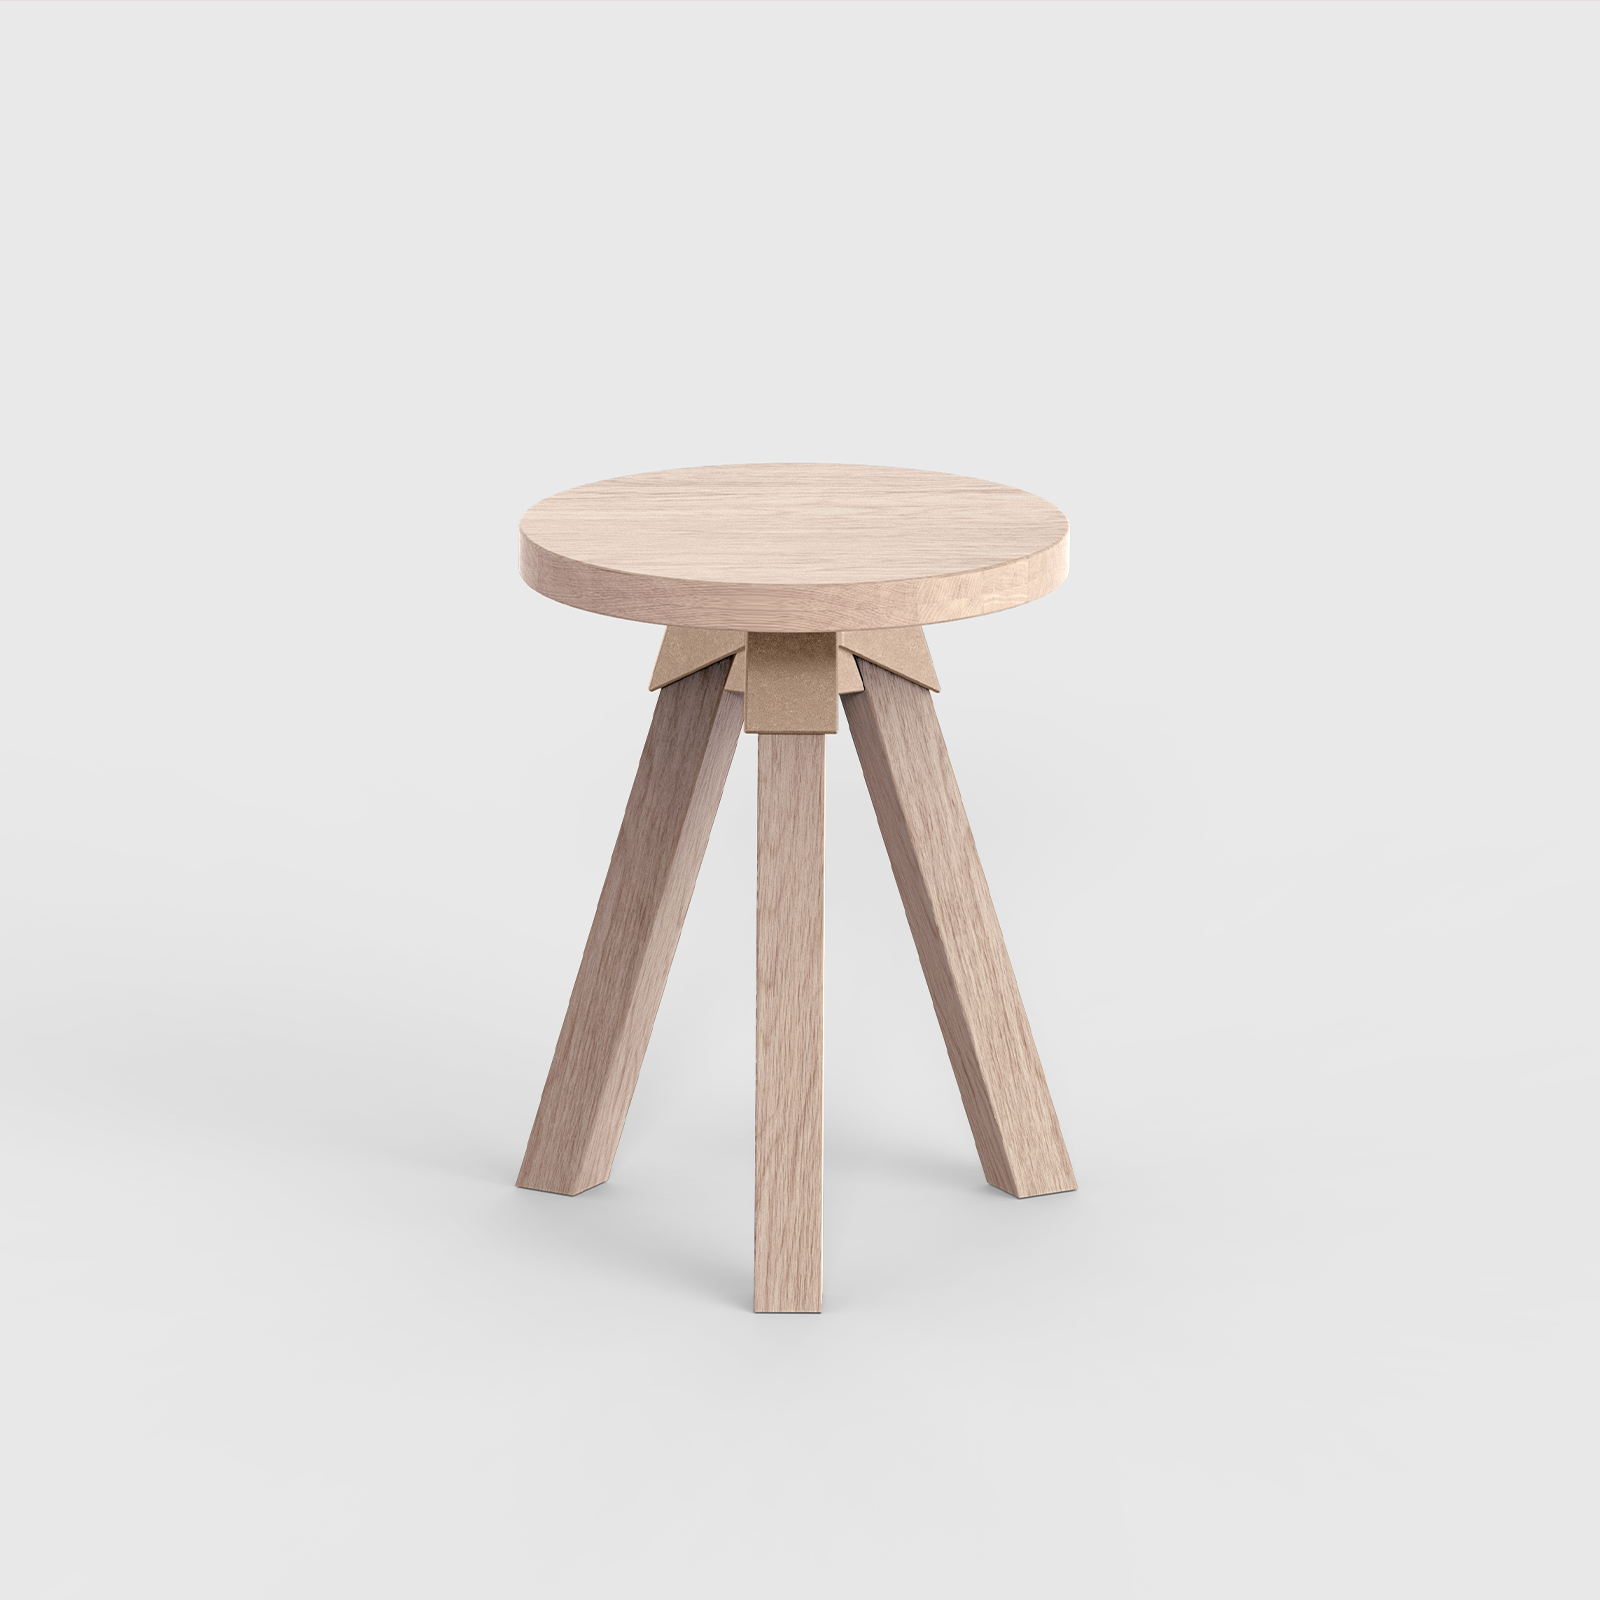 A-joint stool in solid Victorian Ash with cast bronze A-joint